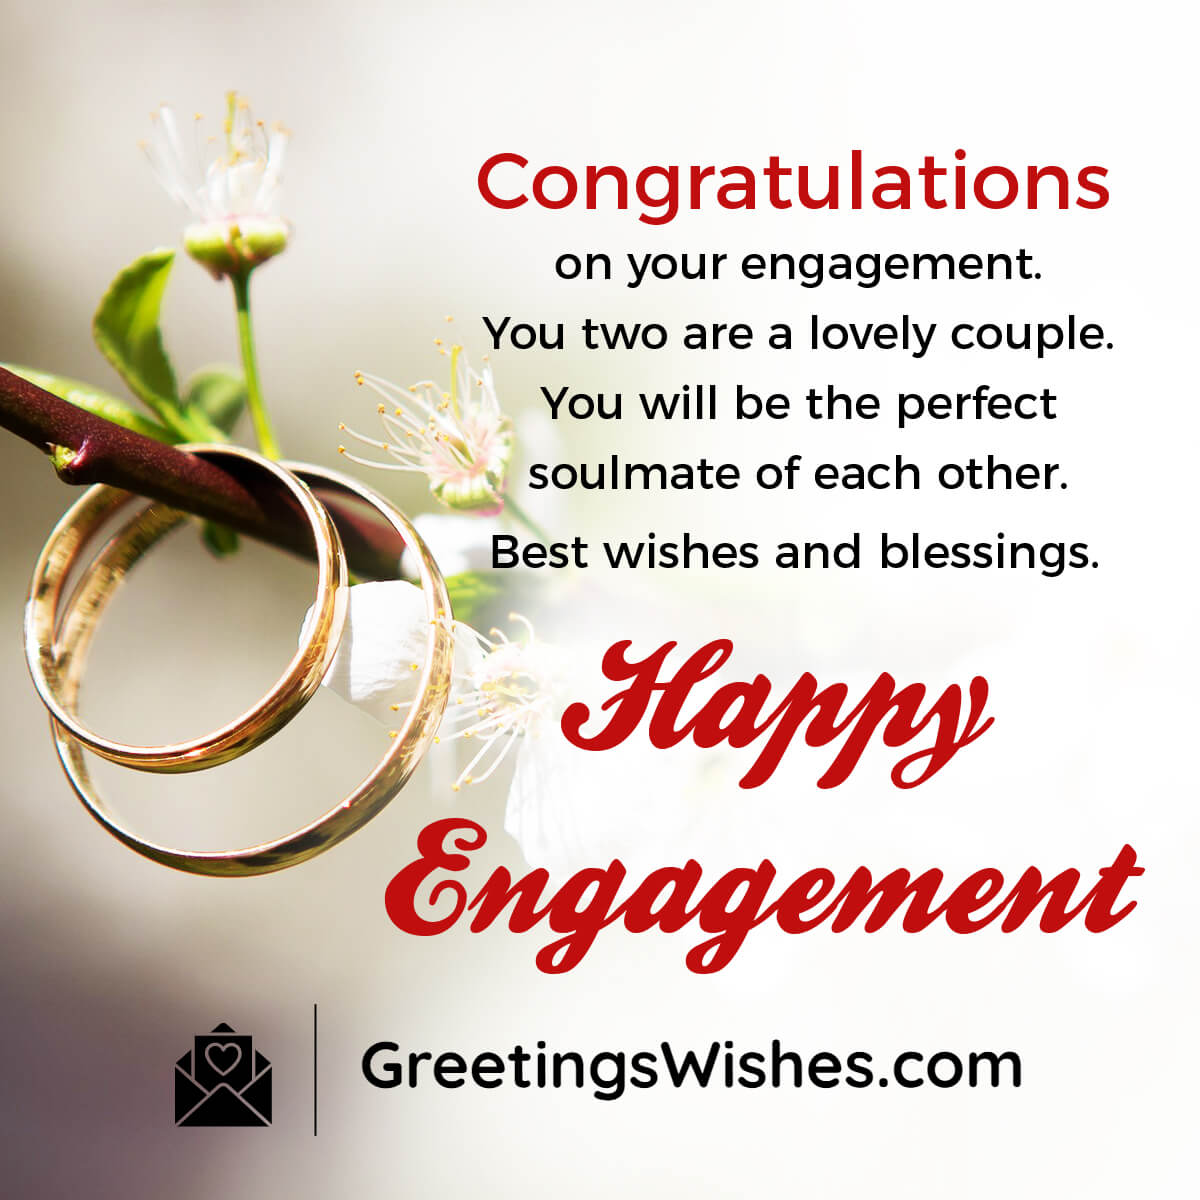 Engagement Wishes - Greetings Wishes